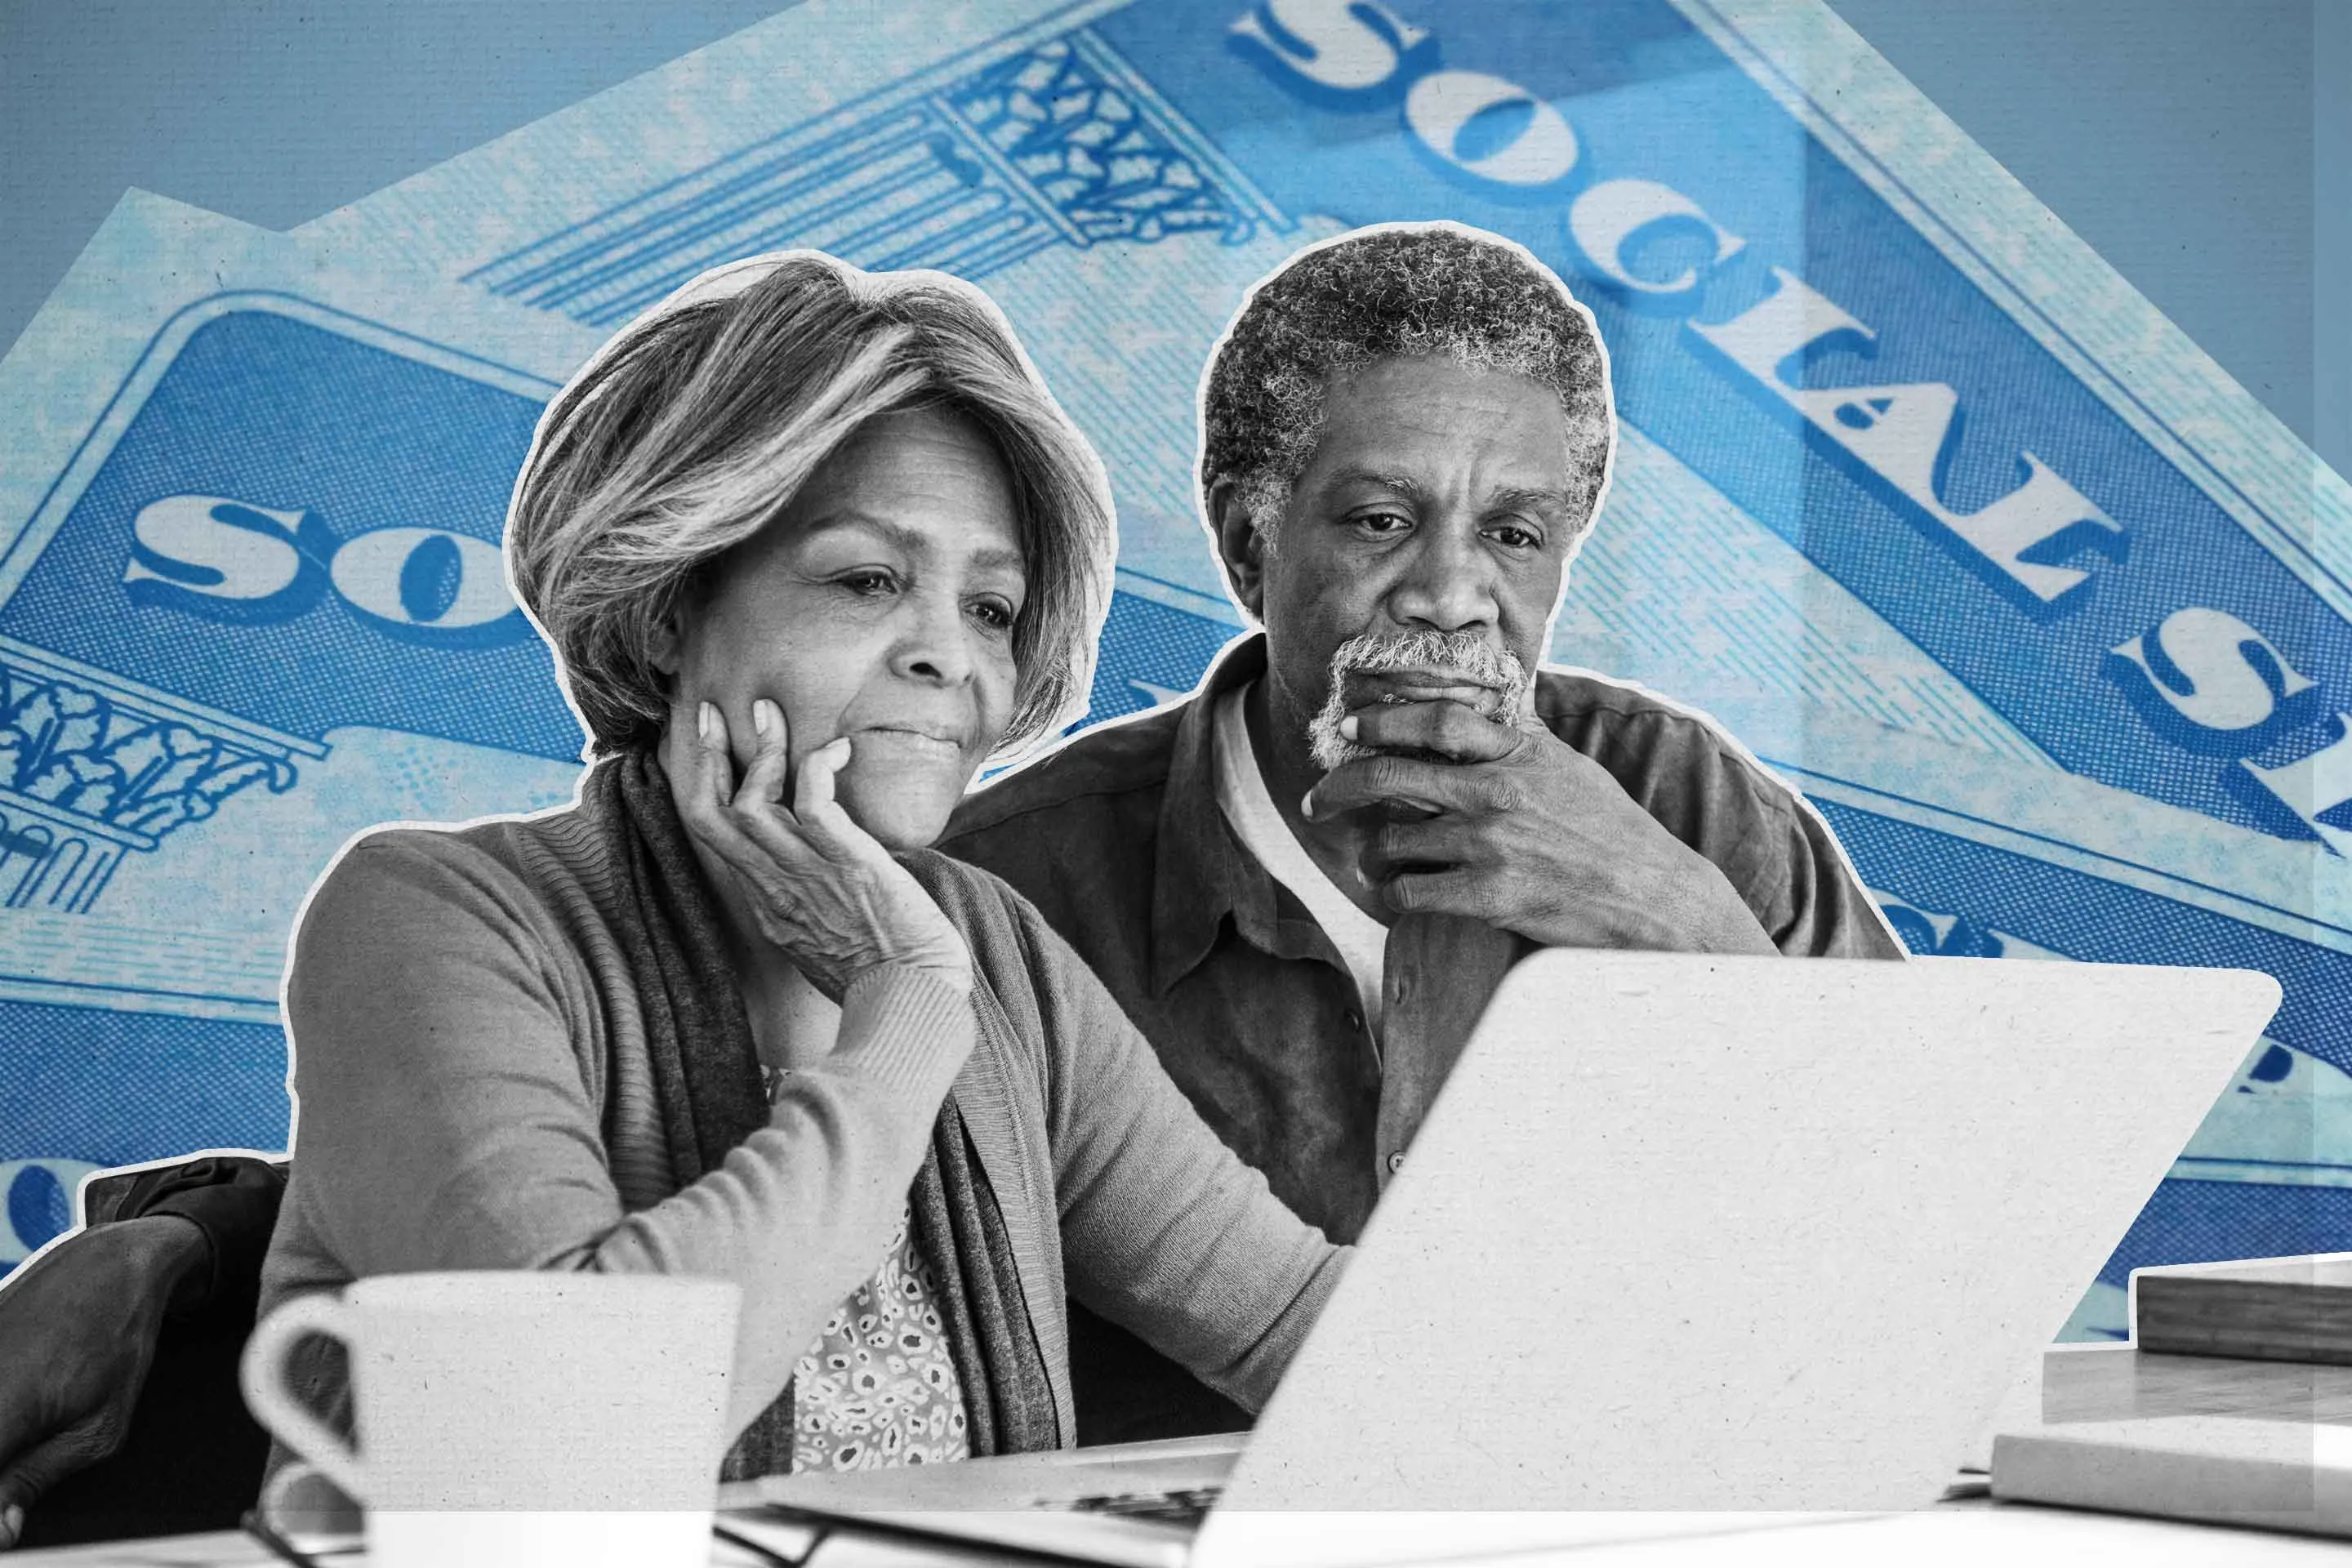 In Retirement, Social Security Will Likely Pay Out More Than You Think: Study